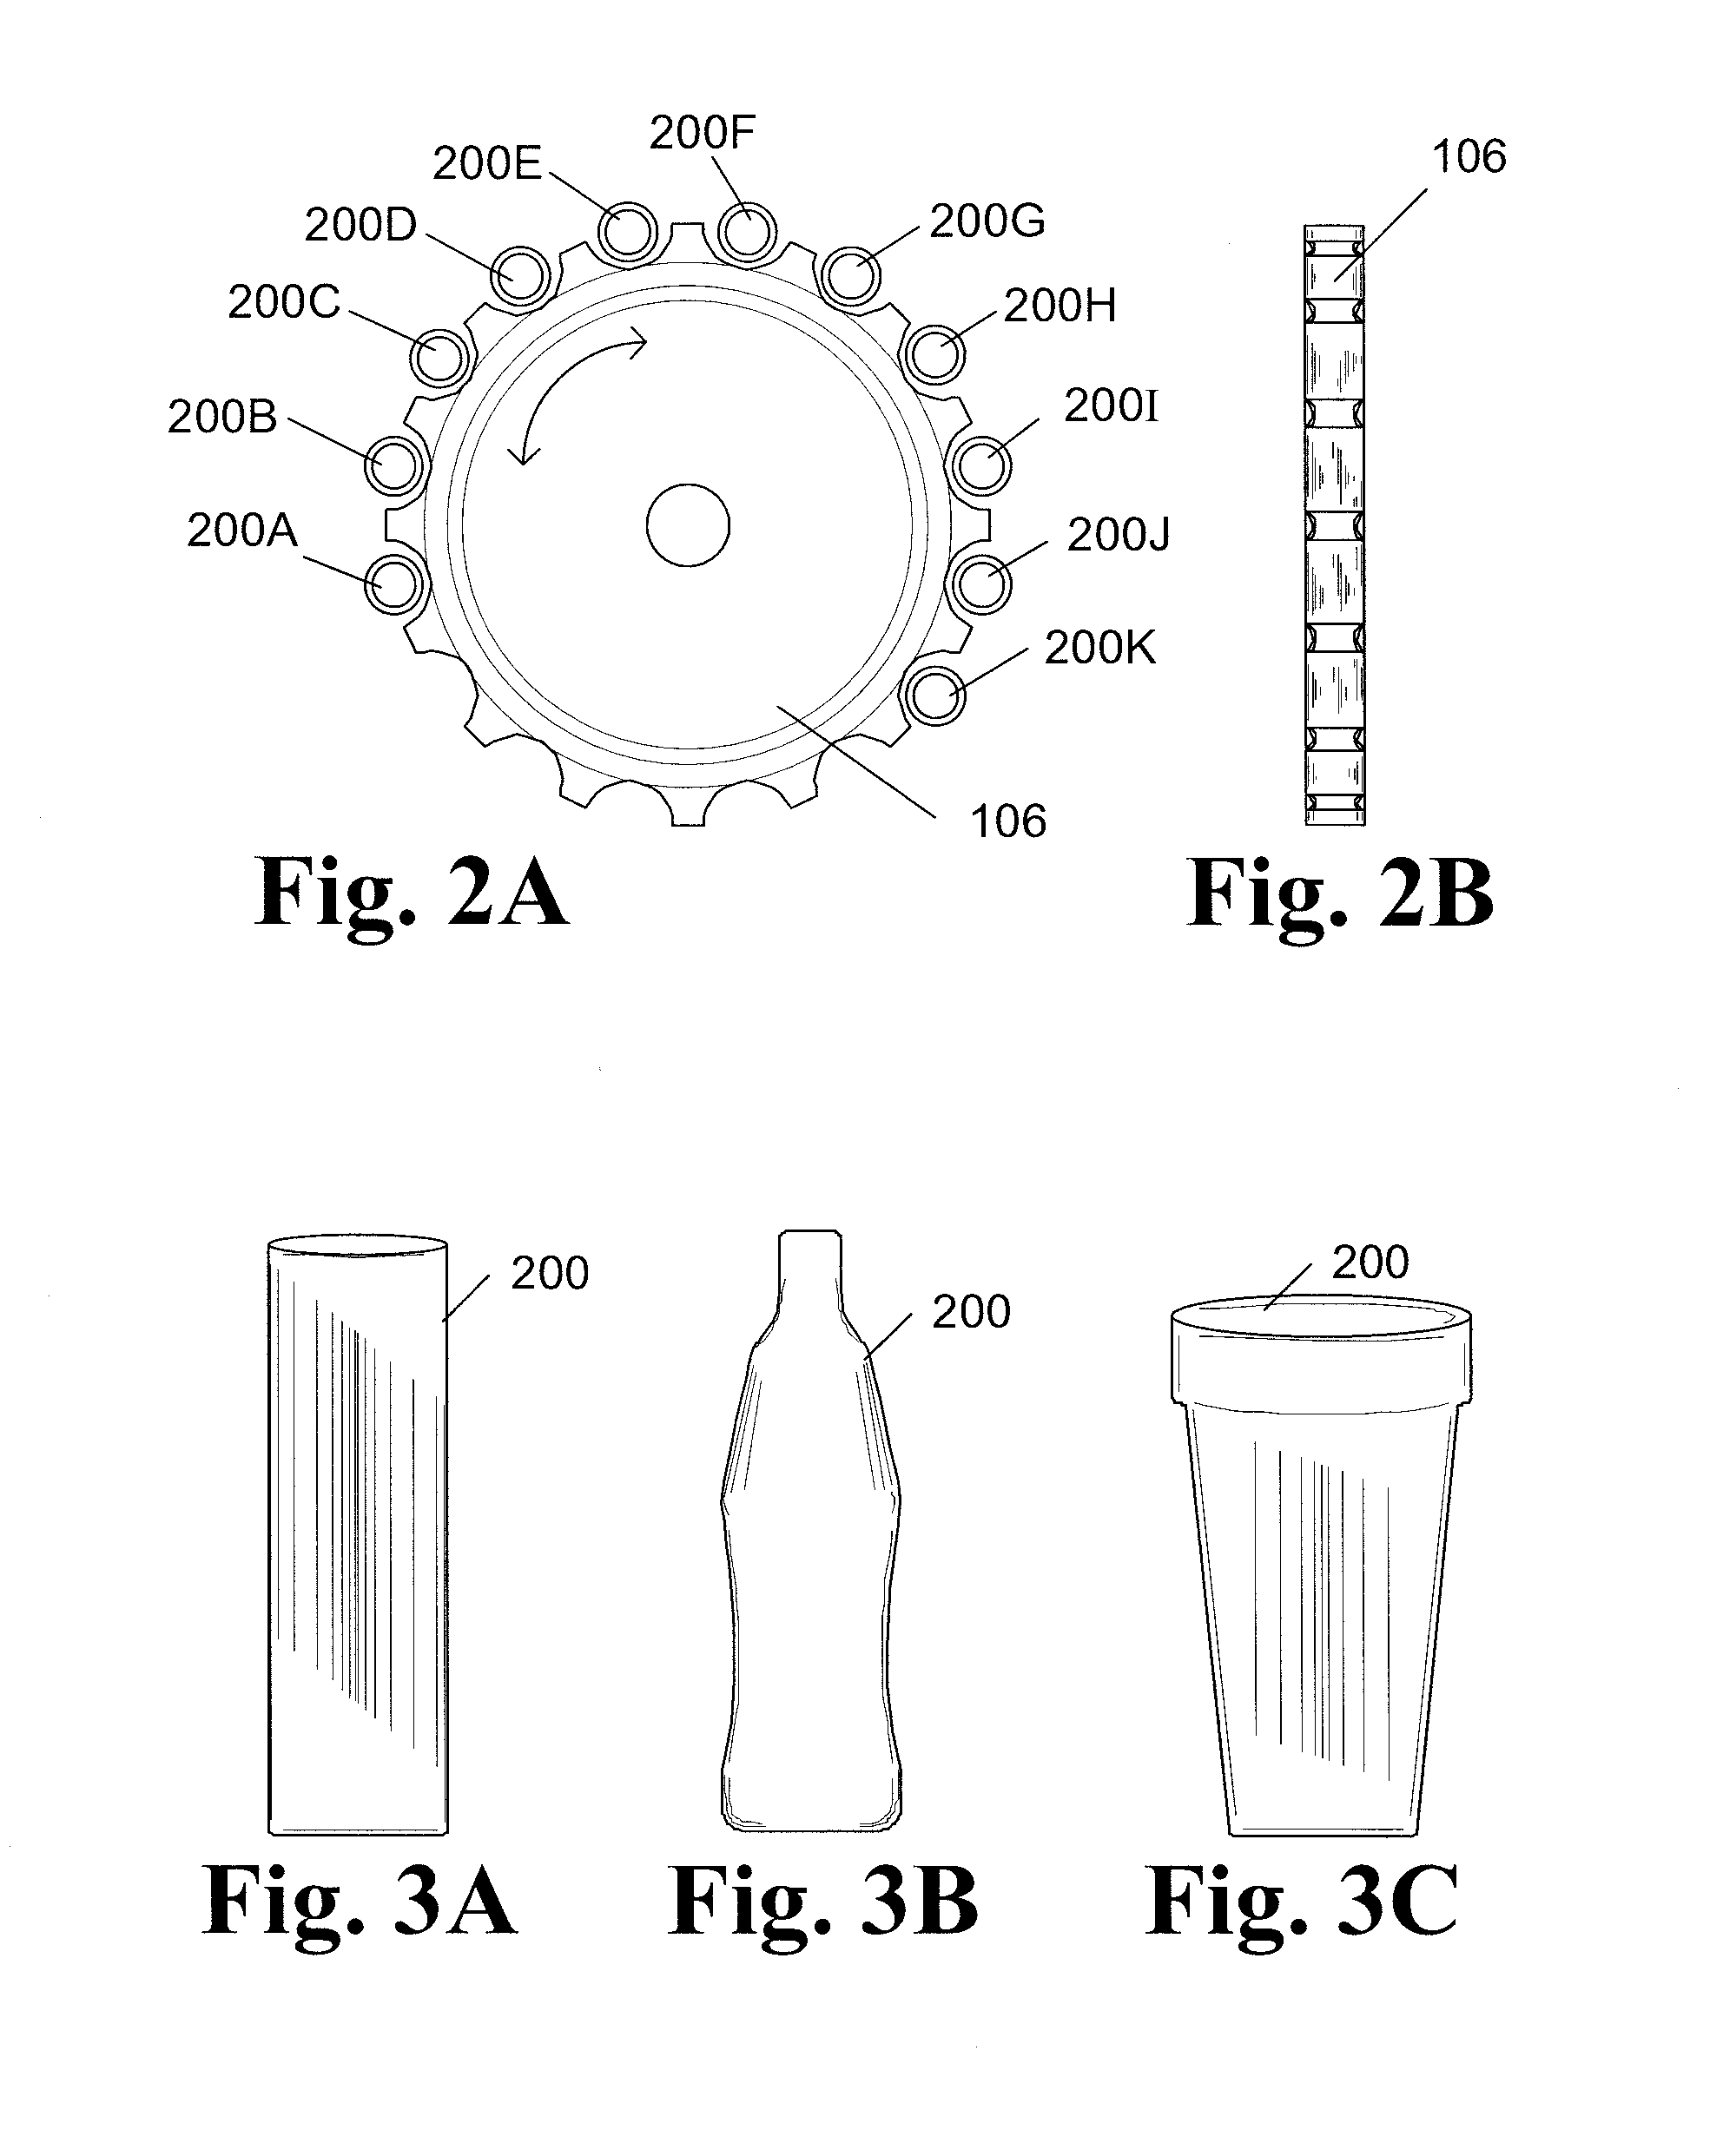 Method of configuring a production line to mass customize shaped vessels